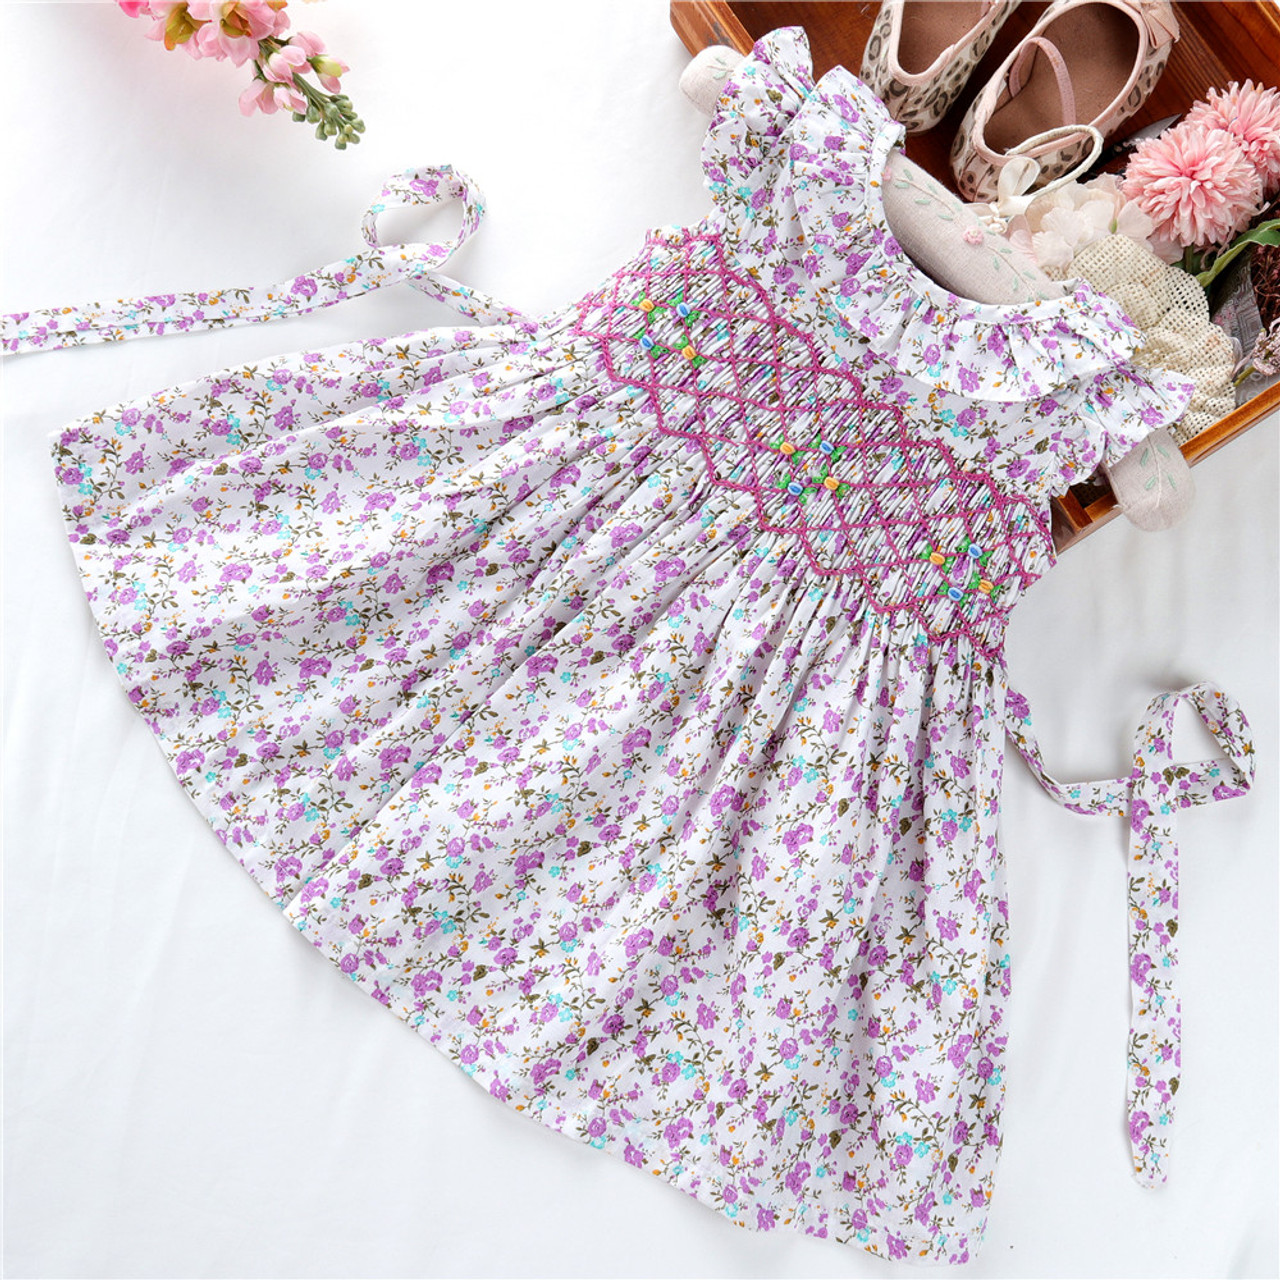 Baby Girl kid Dress New born 3-6 Month Layers Frock Crochet Wool Knitting  Shoes | eBay